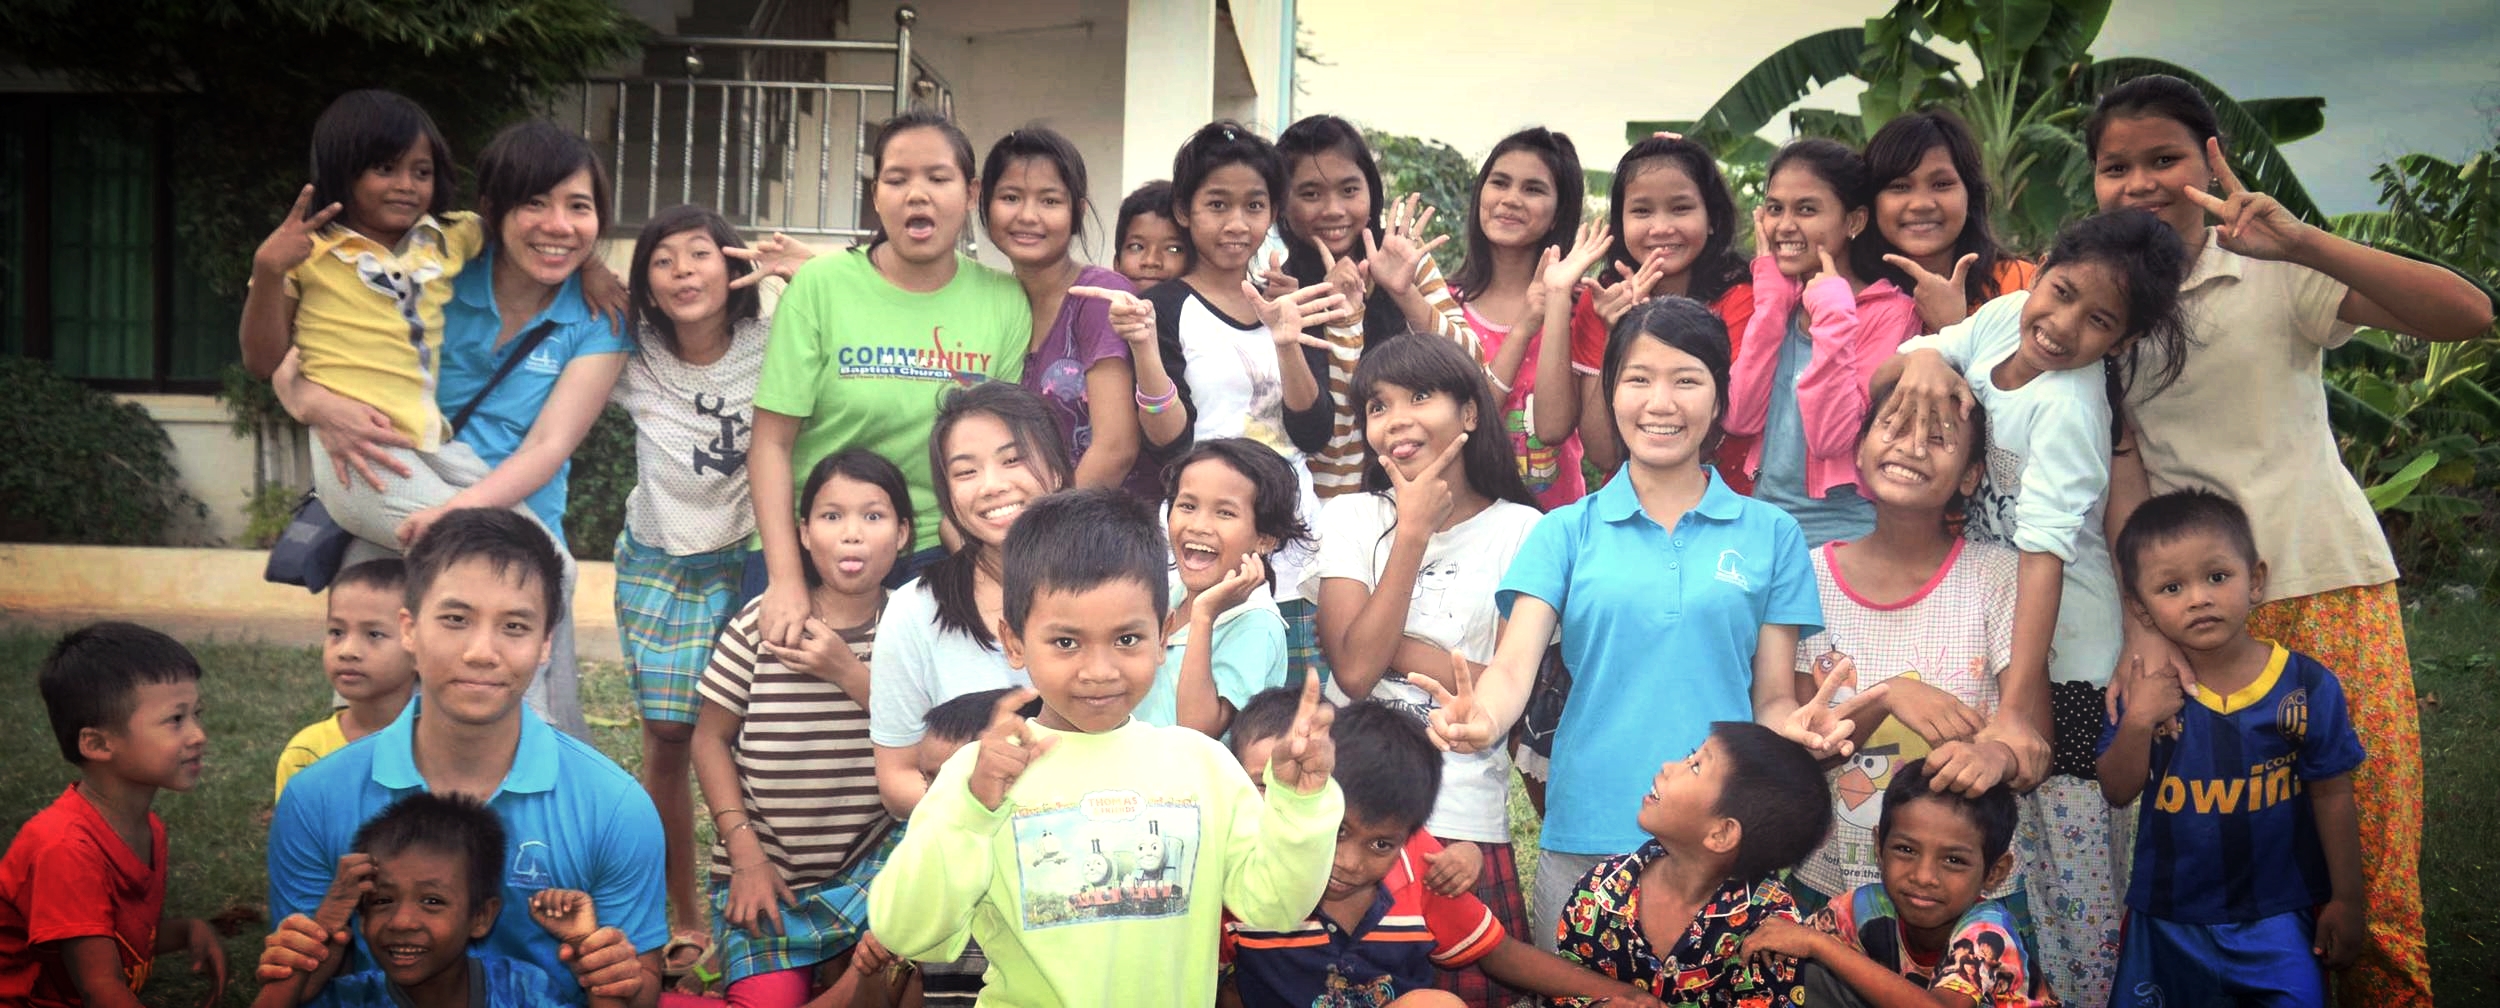  CAMBODIA 2015   the missions team are safely home after a wonderful time in Cambodia!&nbsp;&nbsp;&nbsp;    MISSION REPORT  